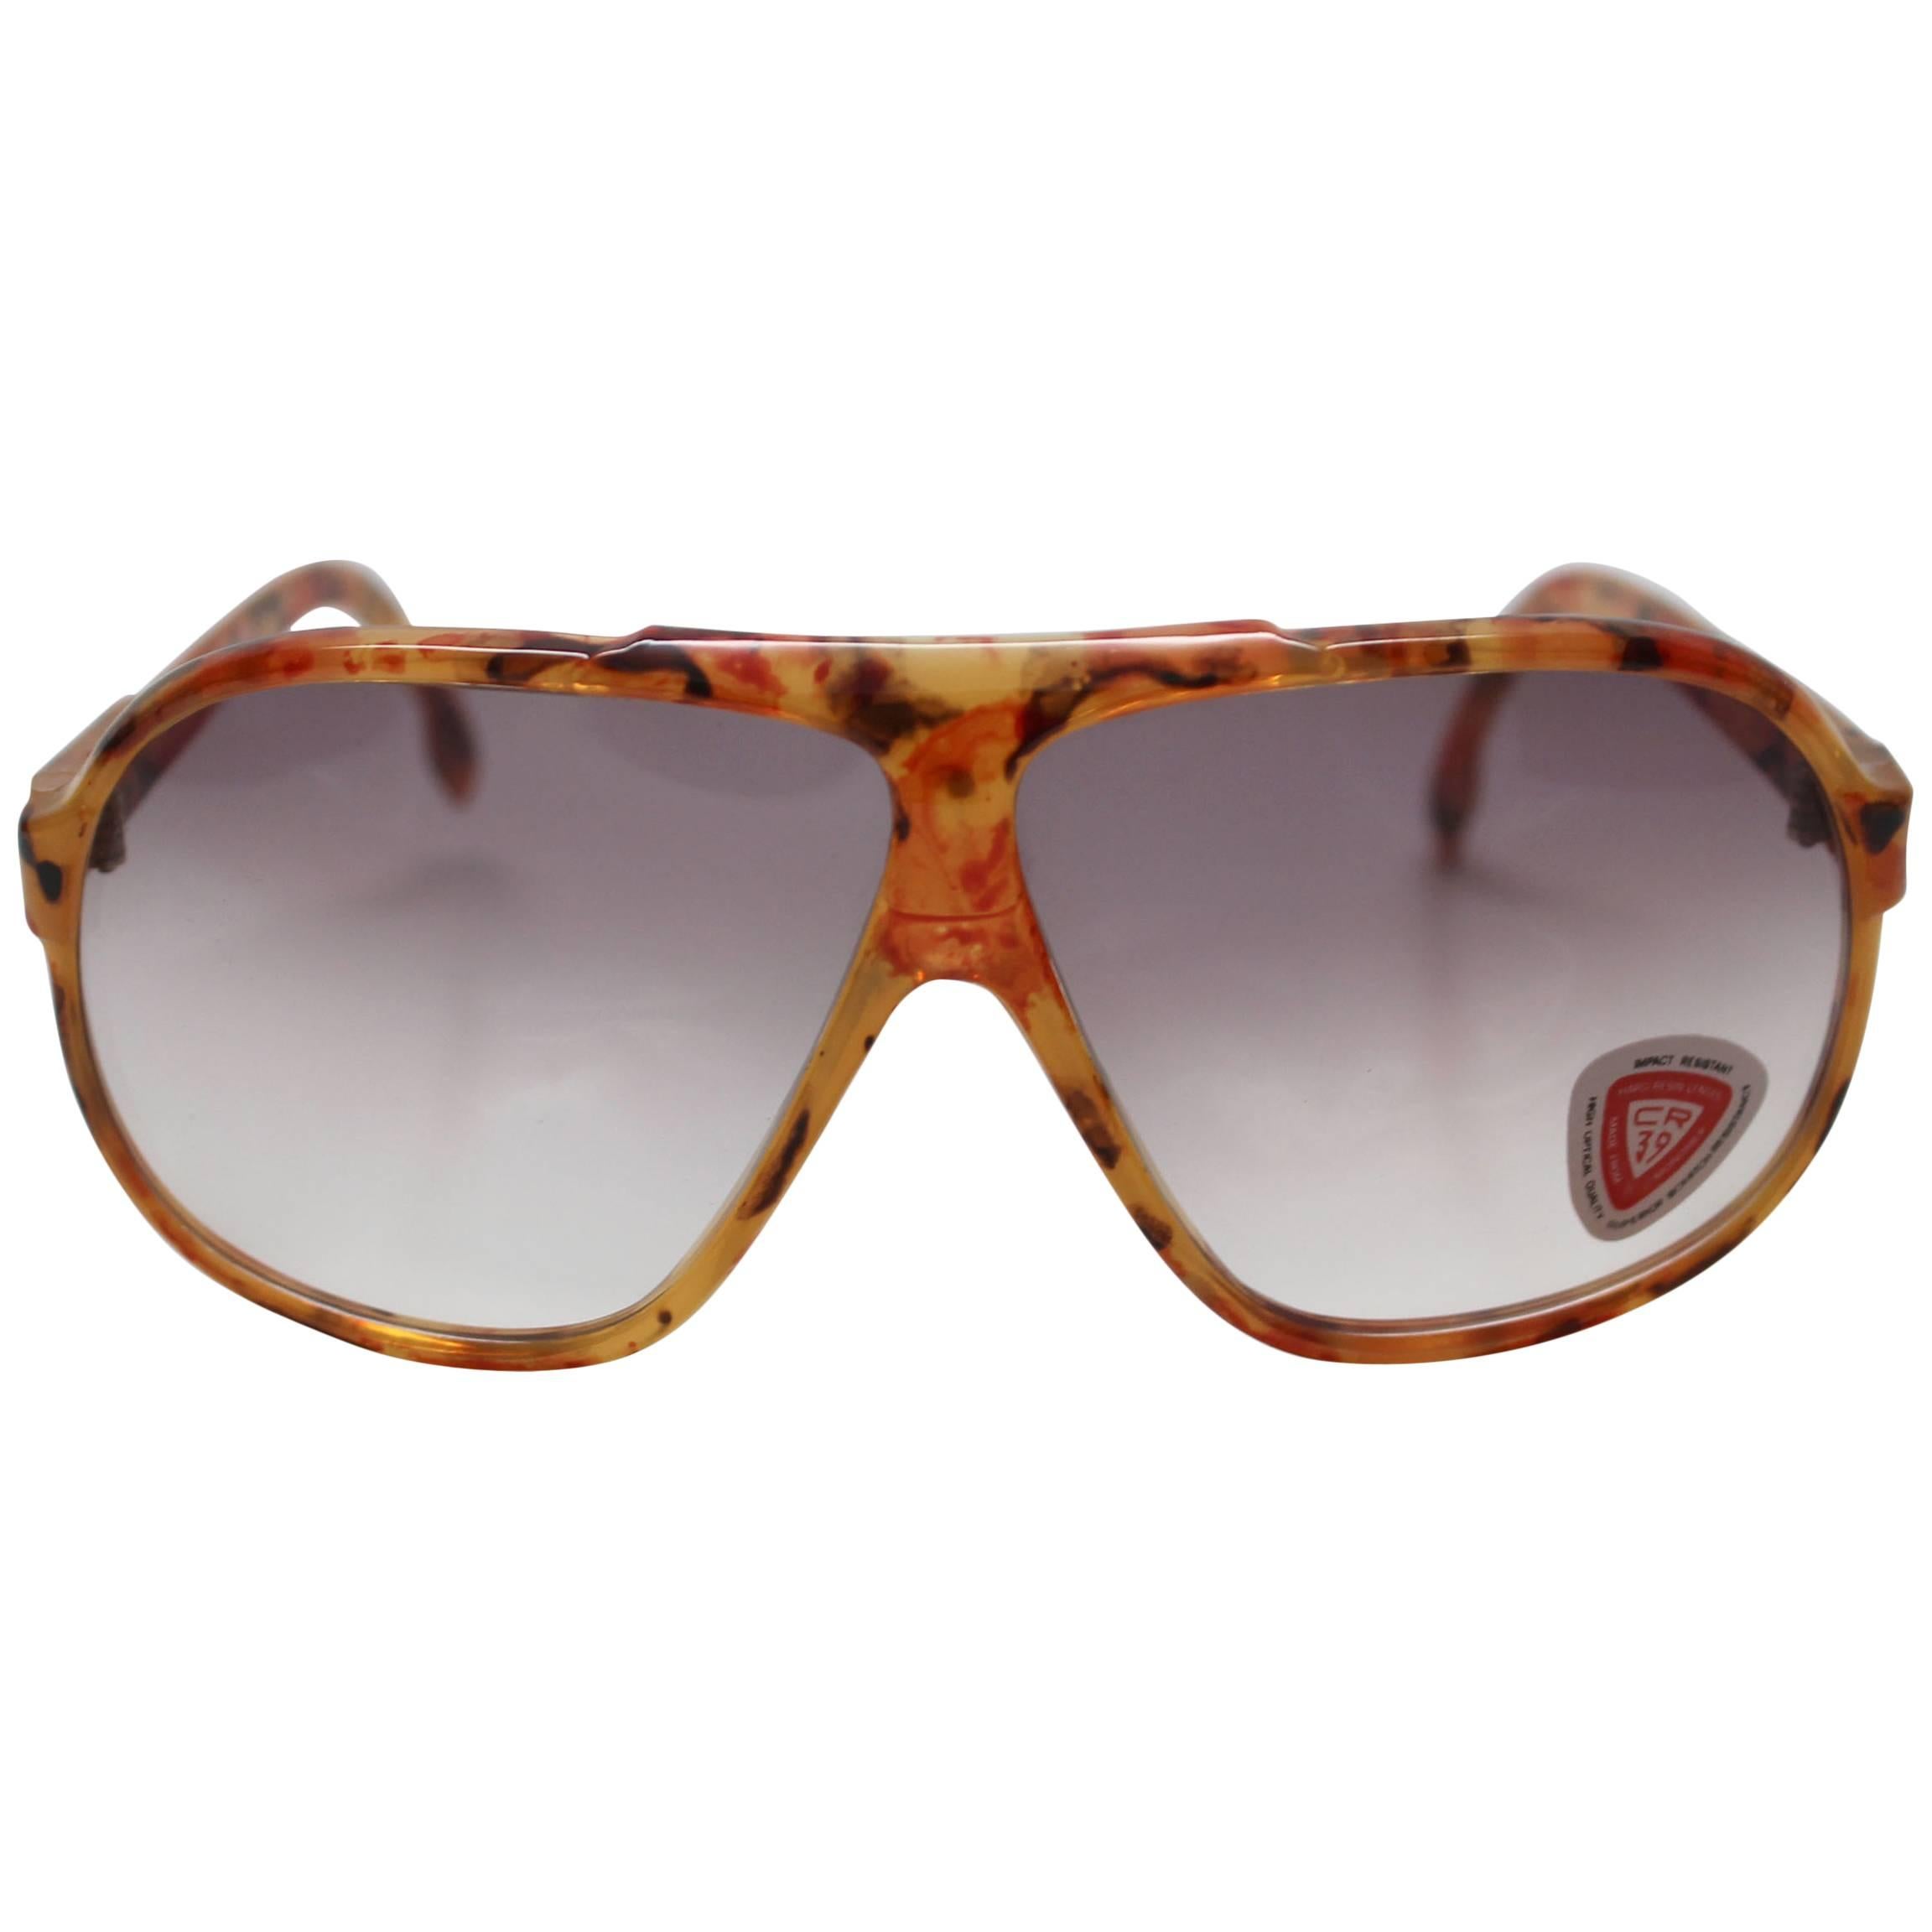 1970s Deadstock Sunglasses Made in Italy For Sale